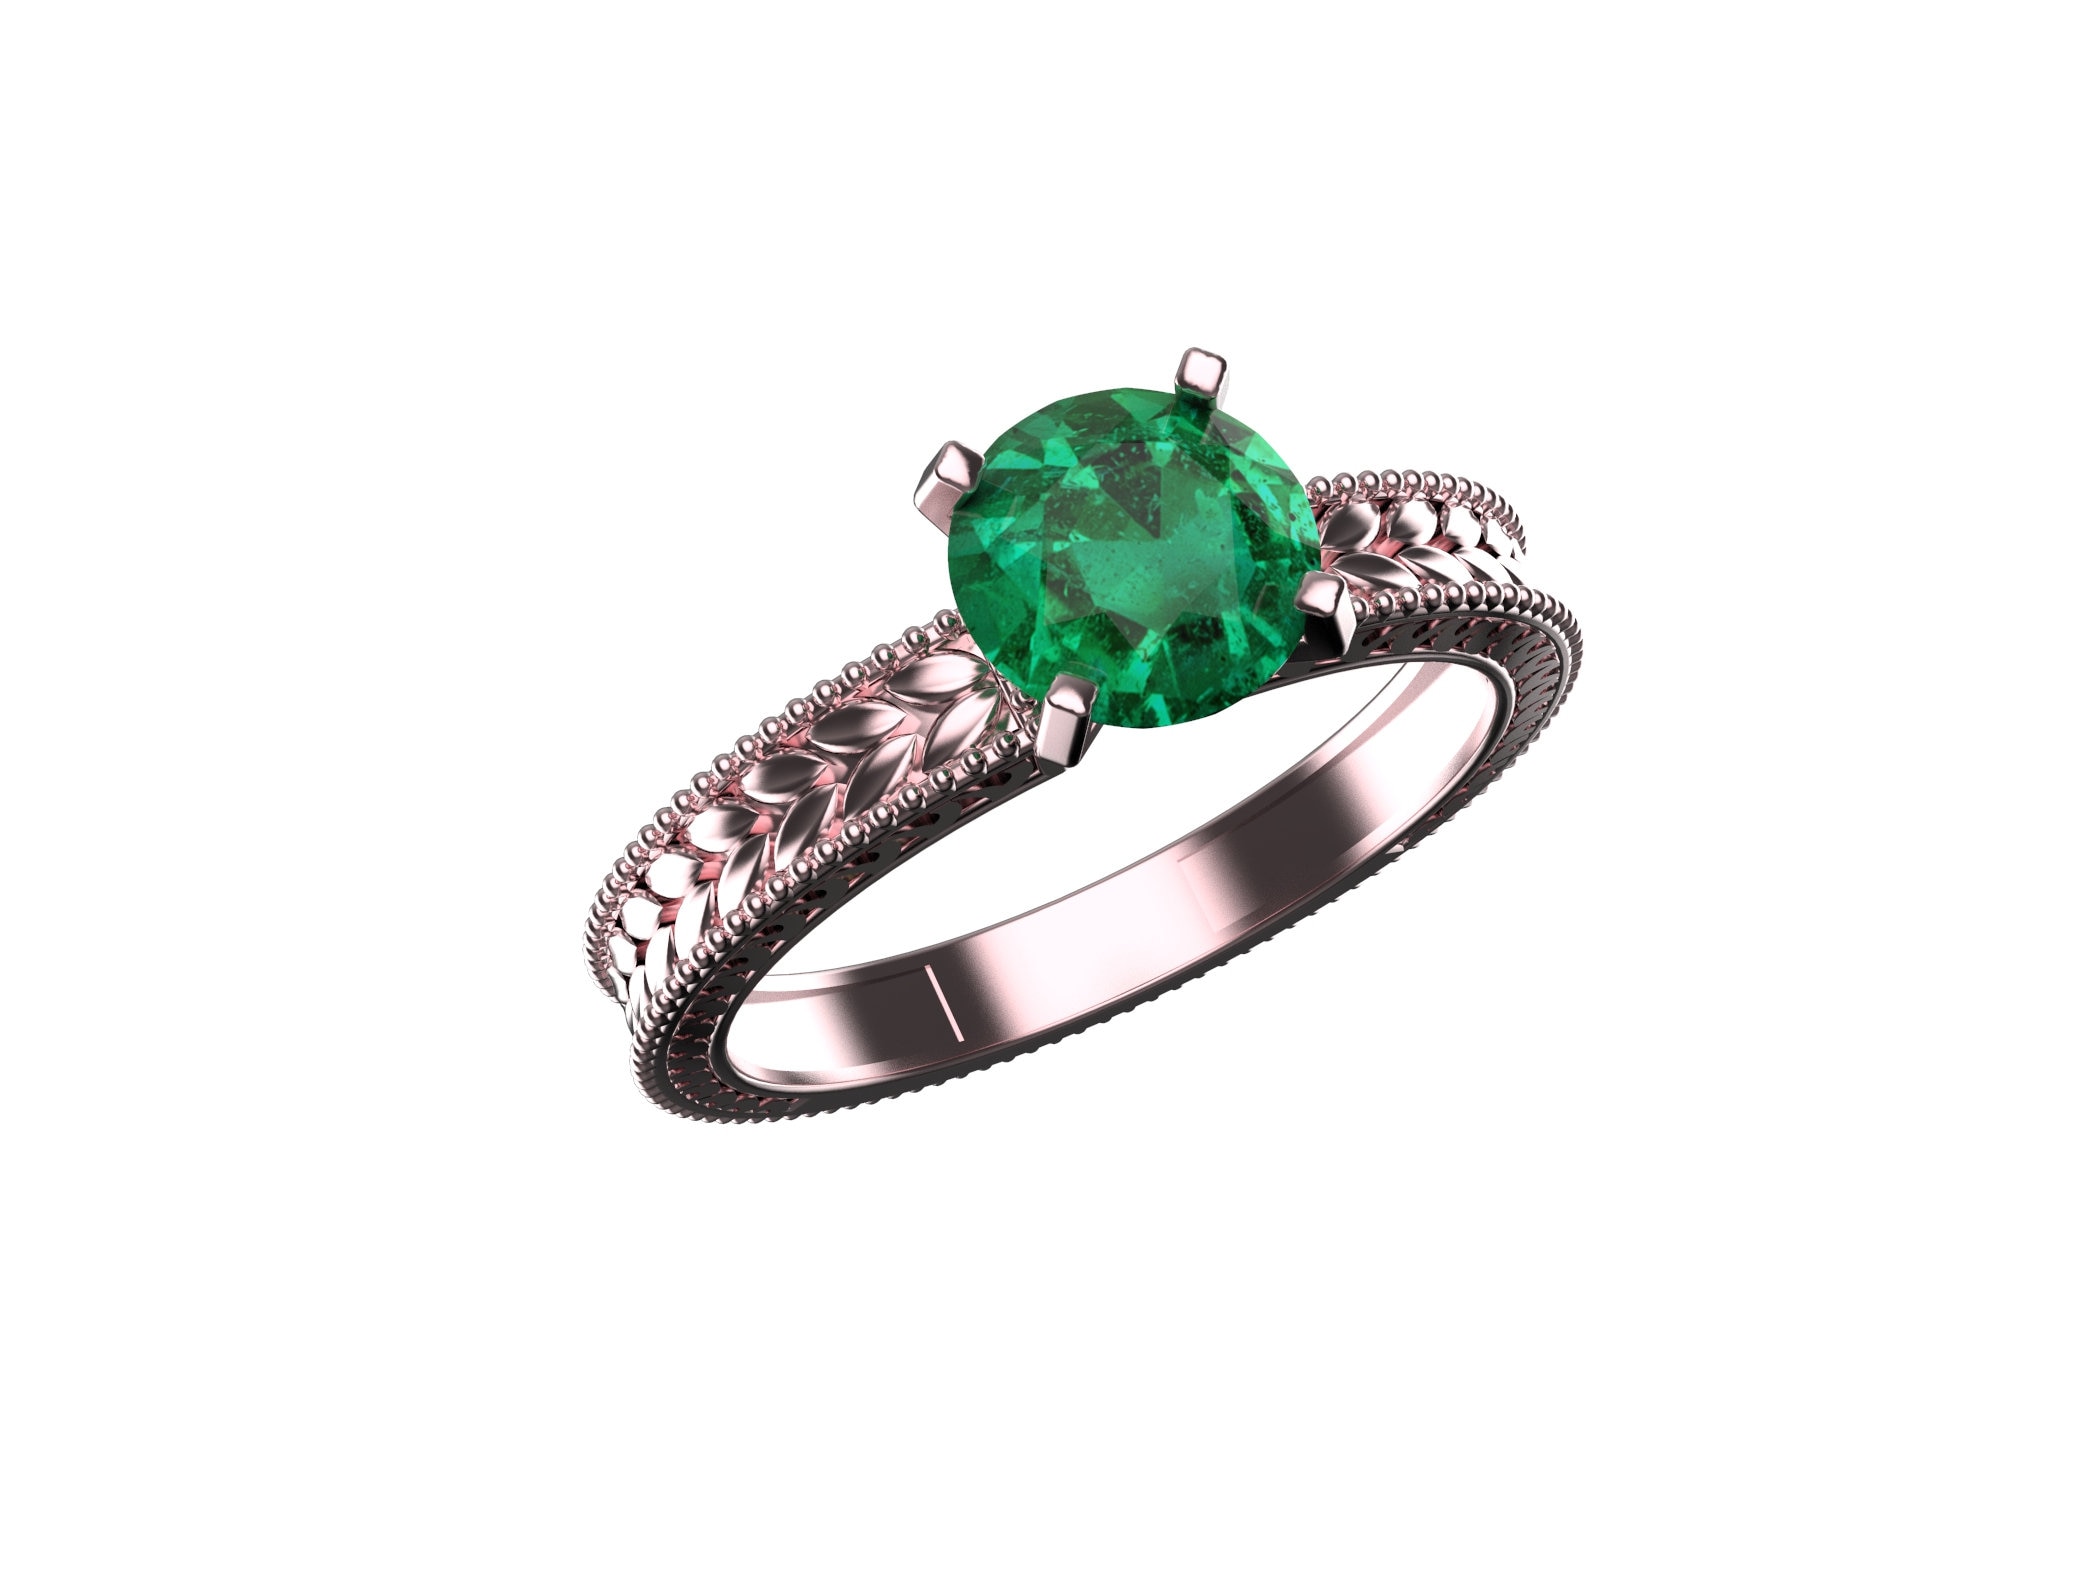 Antique Halo Style Emerald Proposal Ring, Vintage Twist Band Emerald Ring,  1.5CT Oval Cut Halo 6x8mm Oval Emerald Engagement Gemstone Ring - Etsy | Emerald  ring design, Antique halo, Gemstone engagement rings